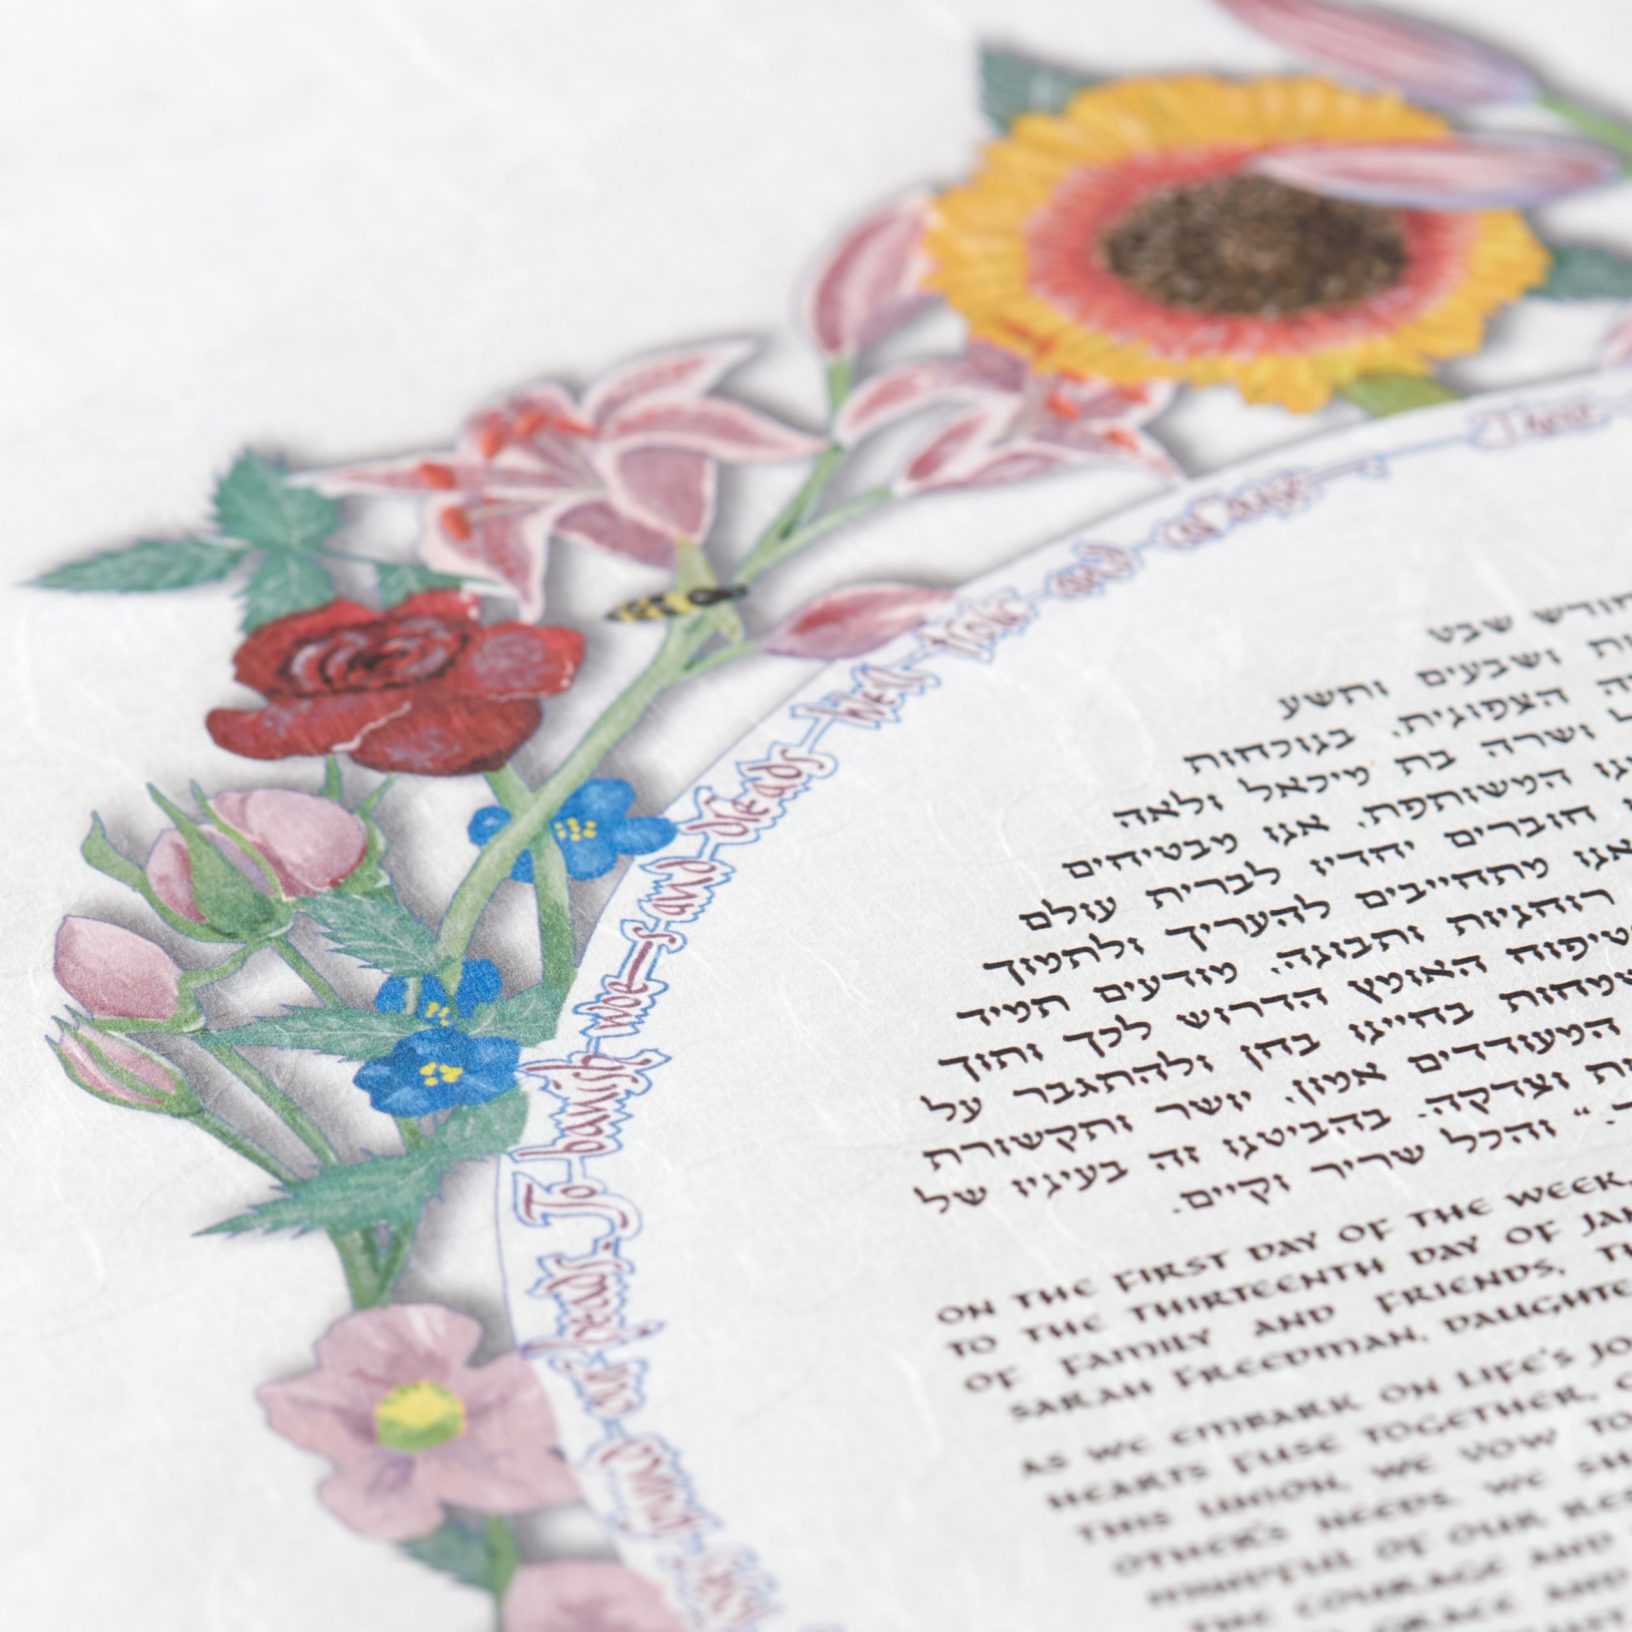 A Feast Of All Your Hours Ketubah Jewish Marriage Contracts by Debra Band